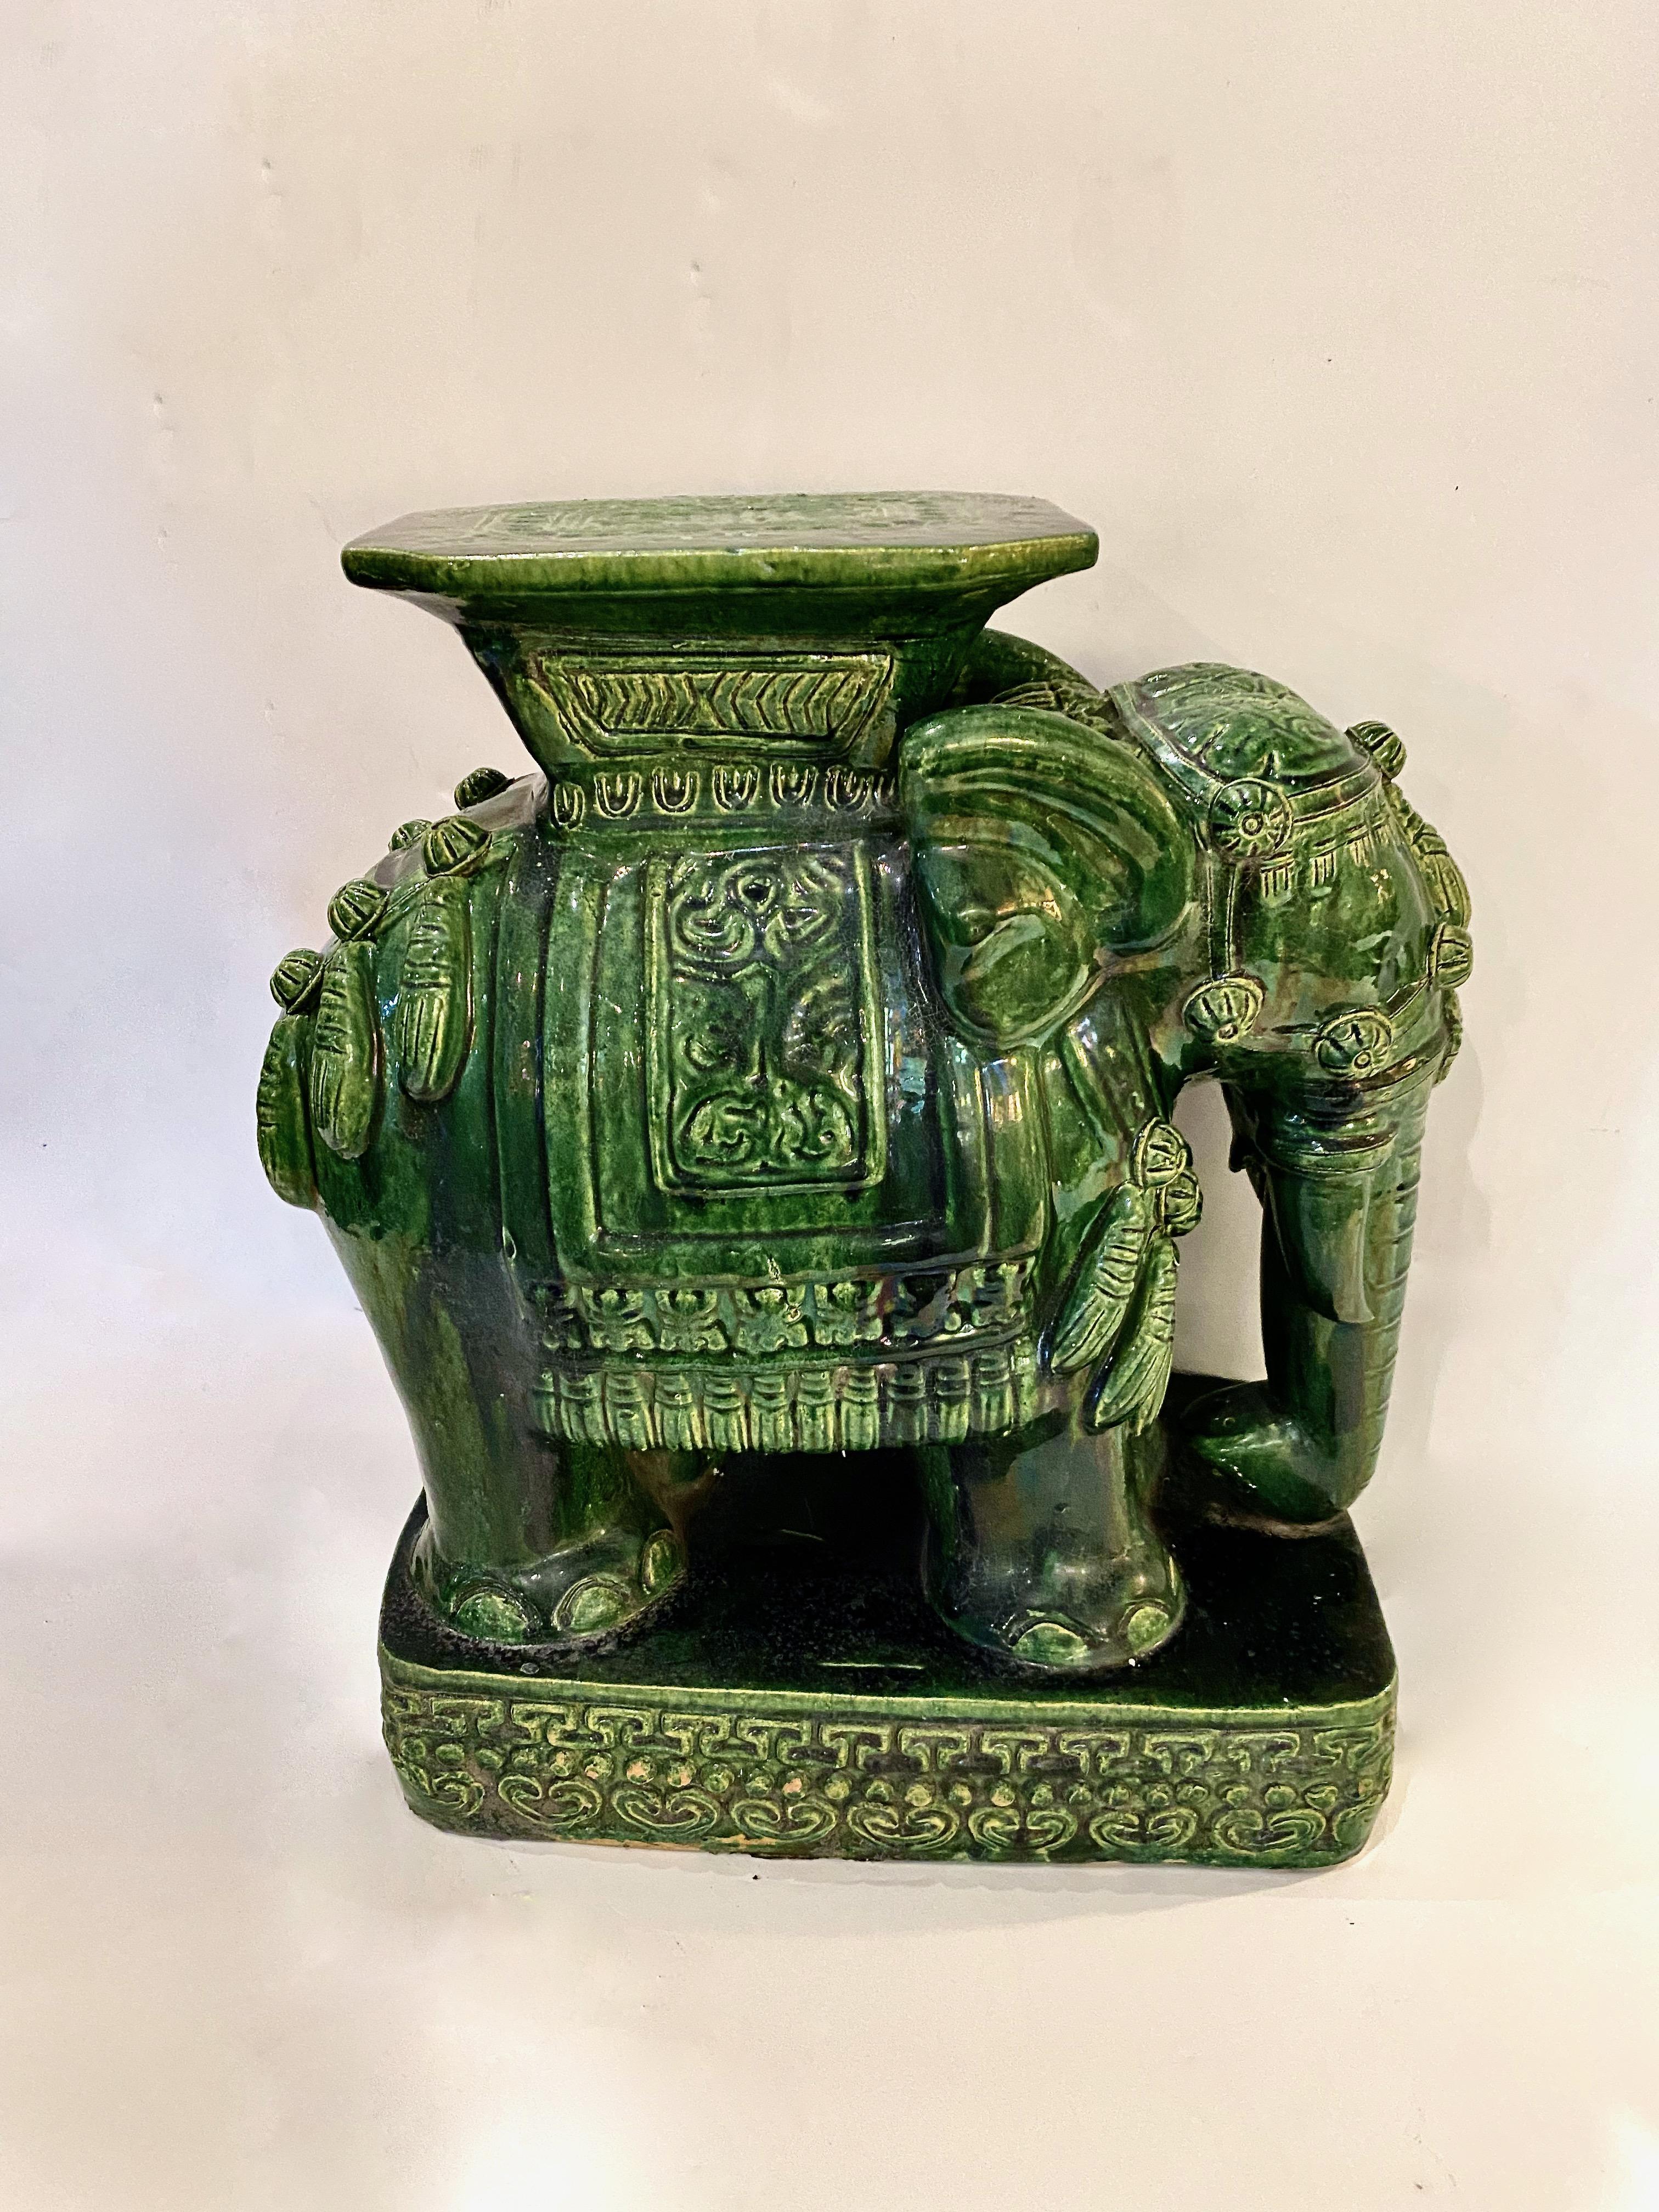 This is a very good example of a mid-century Asian glazed terracotta elephant garden seat or table. The stunning thick green glaze of the elephant makes him unusual and desirable. The beautiful detailing of the tassels is highlighted by the thick